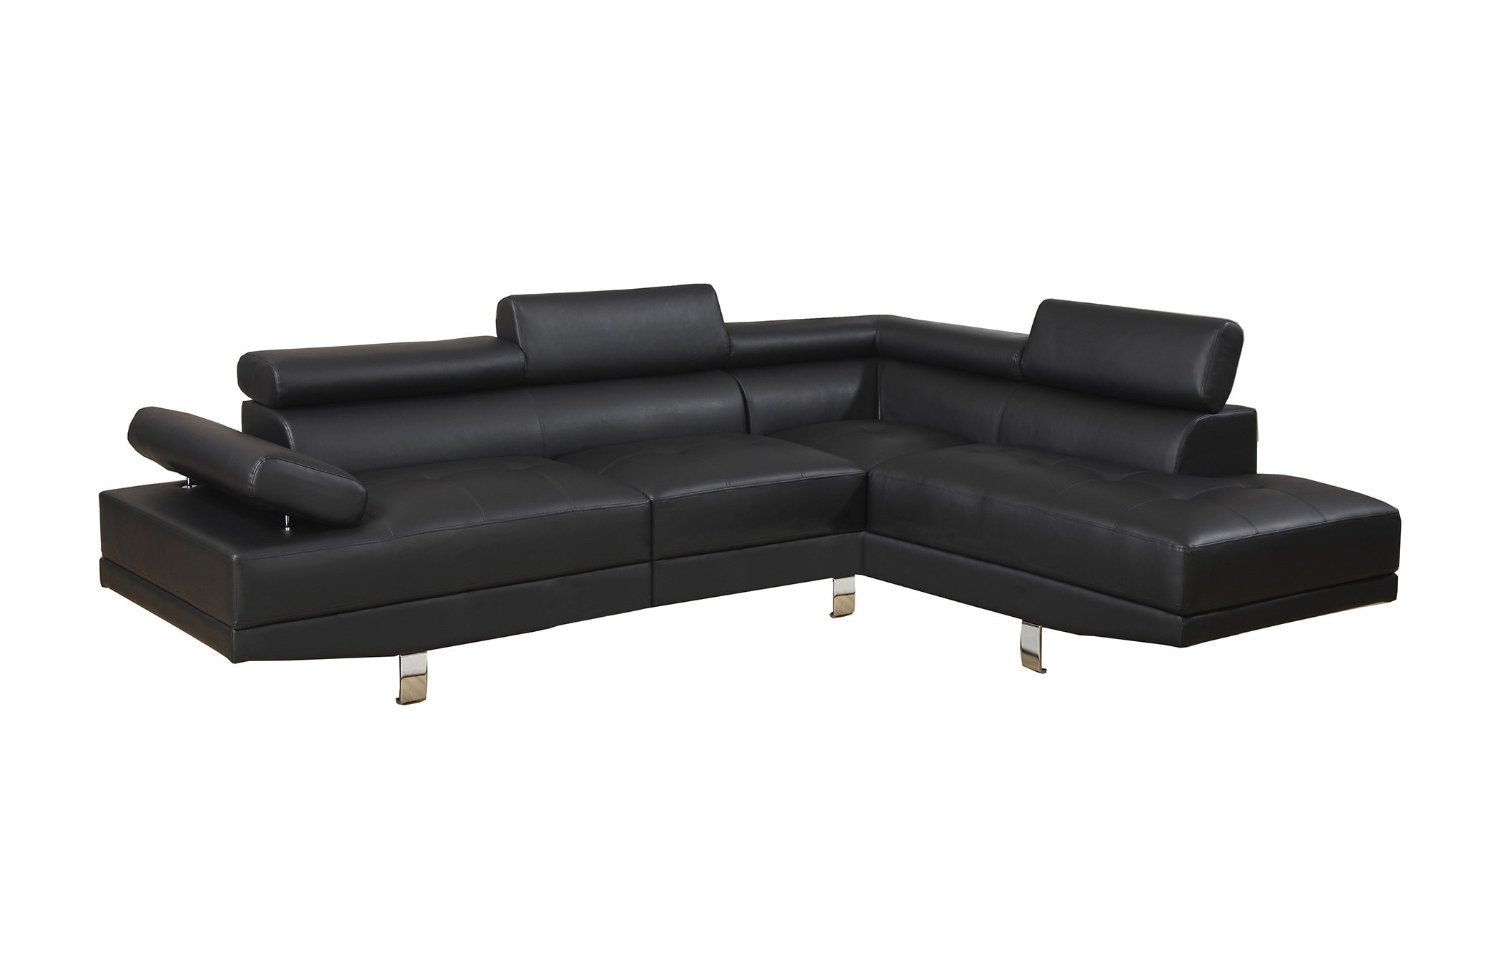 2 Piece Modern Contemporary Faux Leather Sectional Sofa - Black, White with Functional Armrest and Back support (Black)